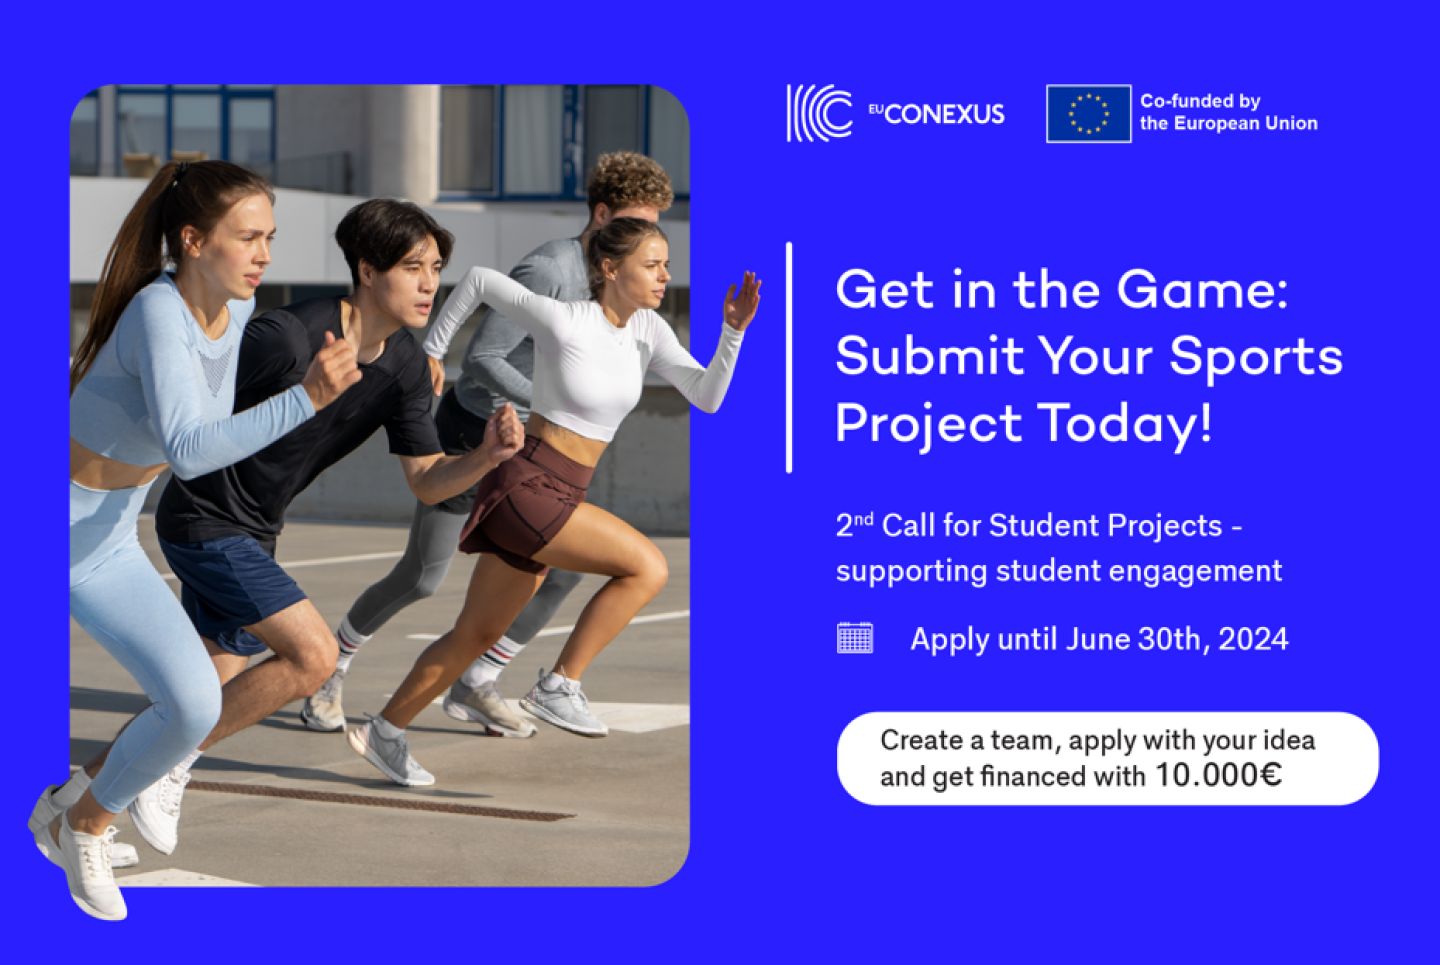 EU-CONEXUS 2nd Call for Student Projects to support student engagement through sport